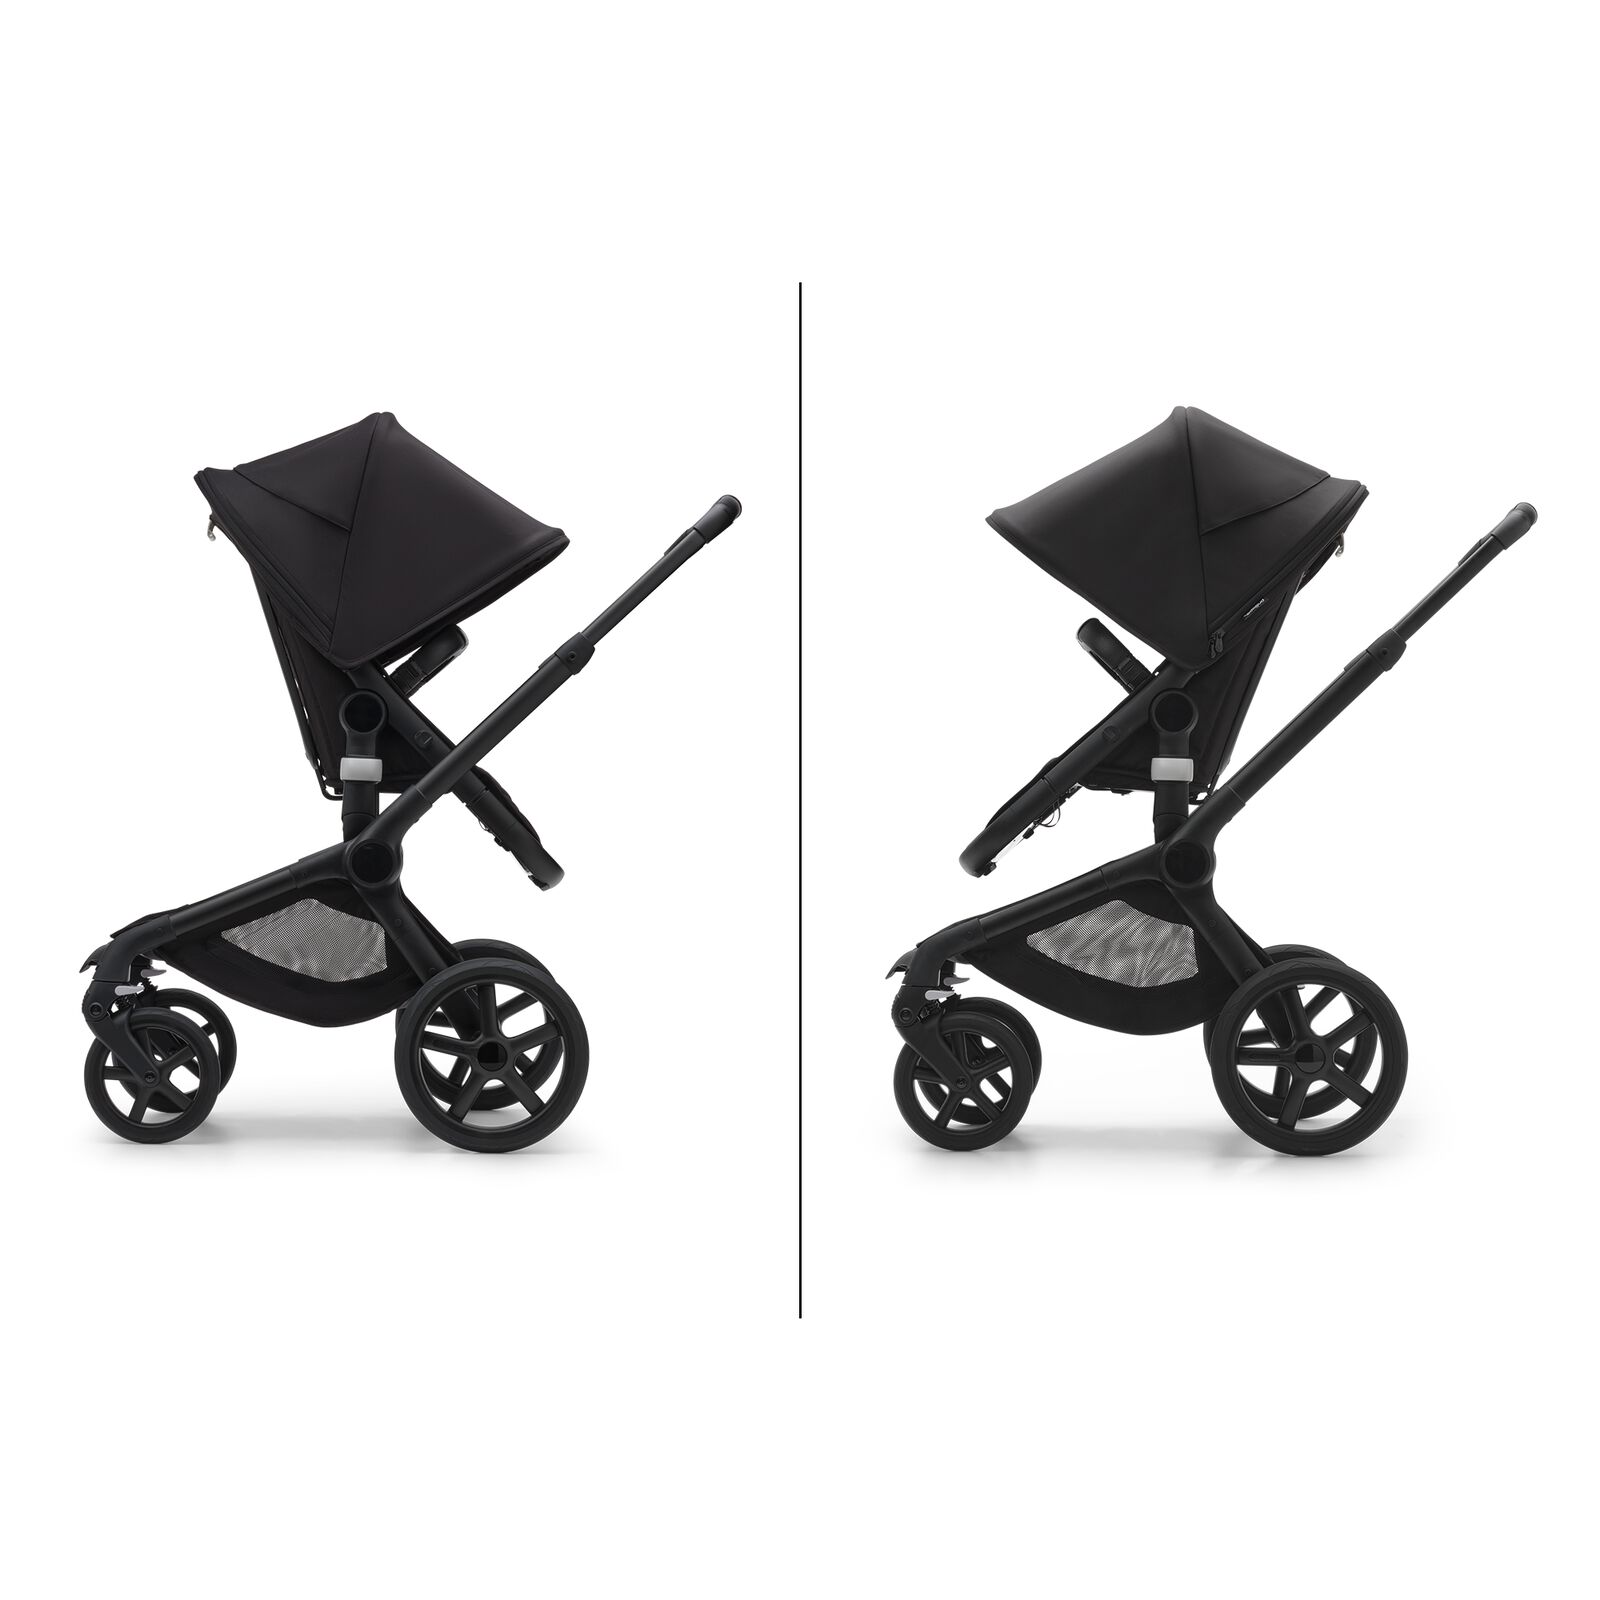 Reversible seat on the Bugaboo Fox 5: Facing parent or facing the world.